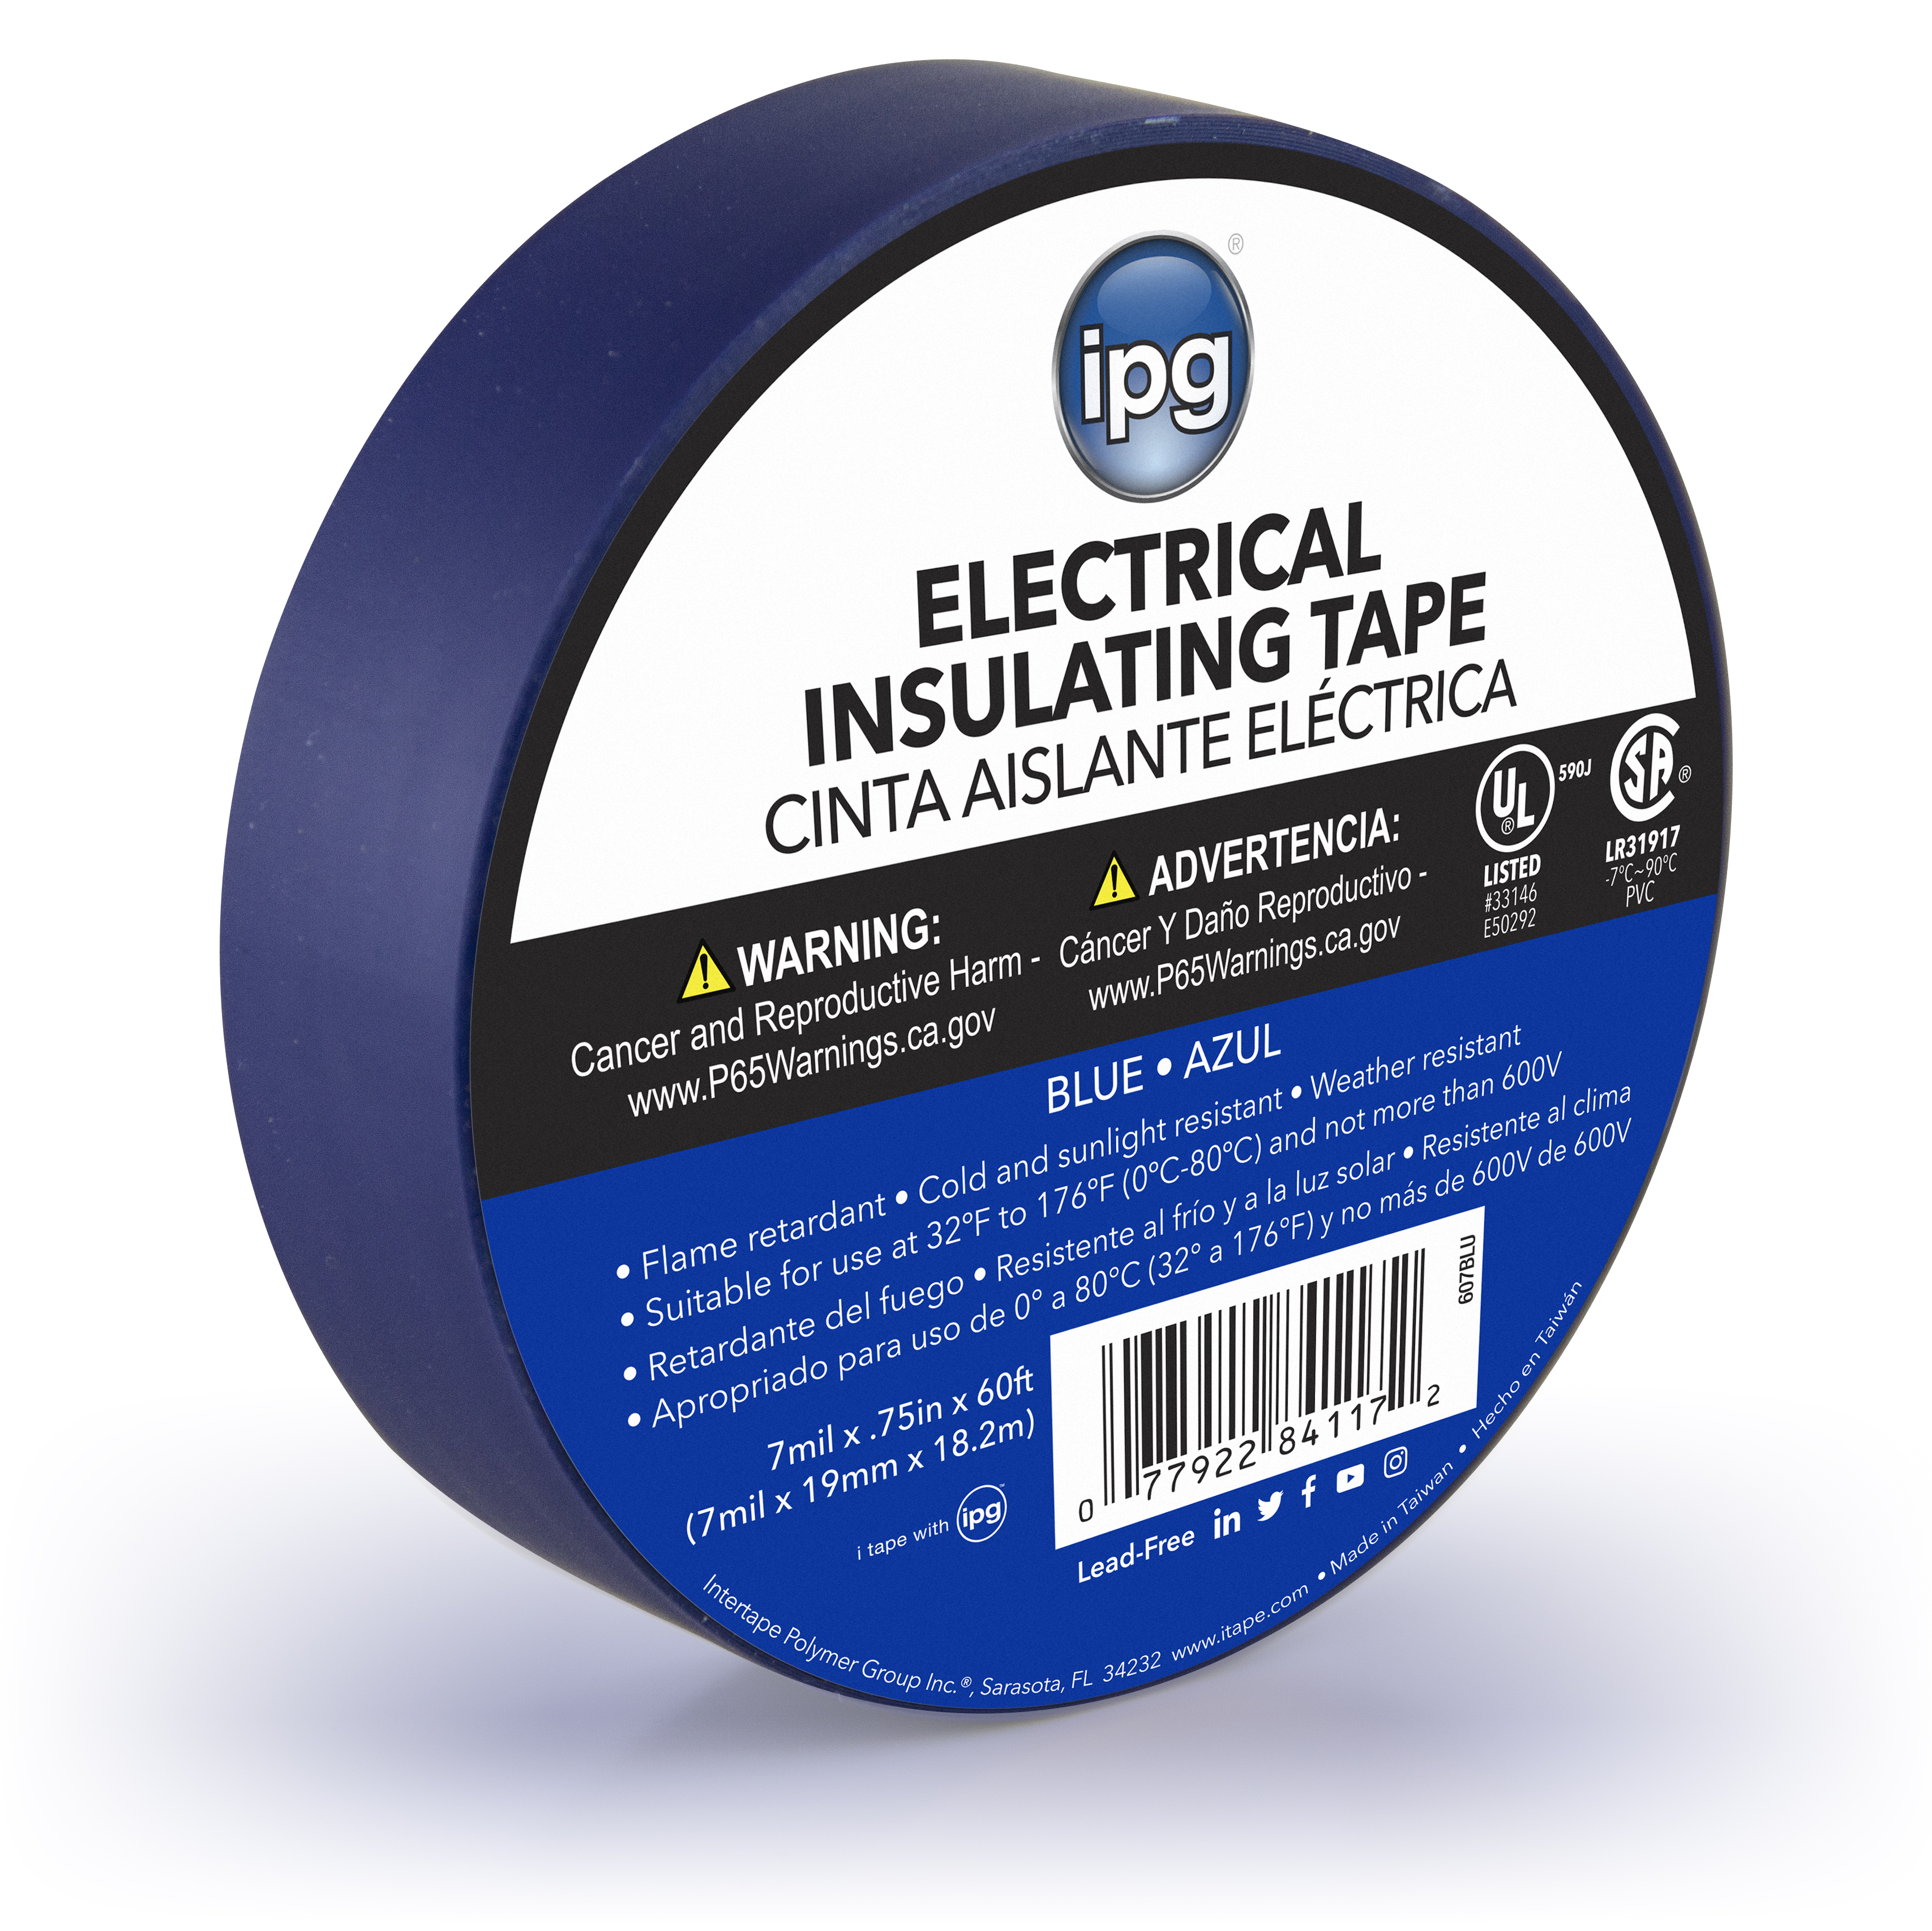 Medium Electrical Tape, Electrical Tapes